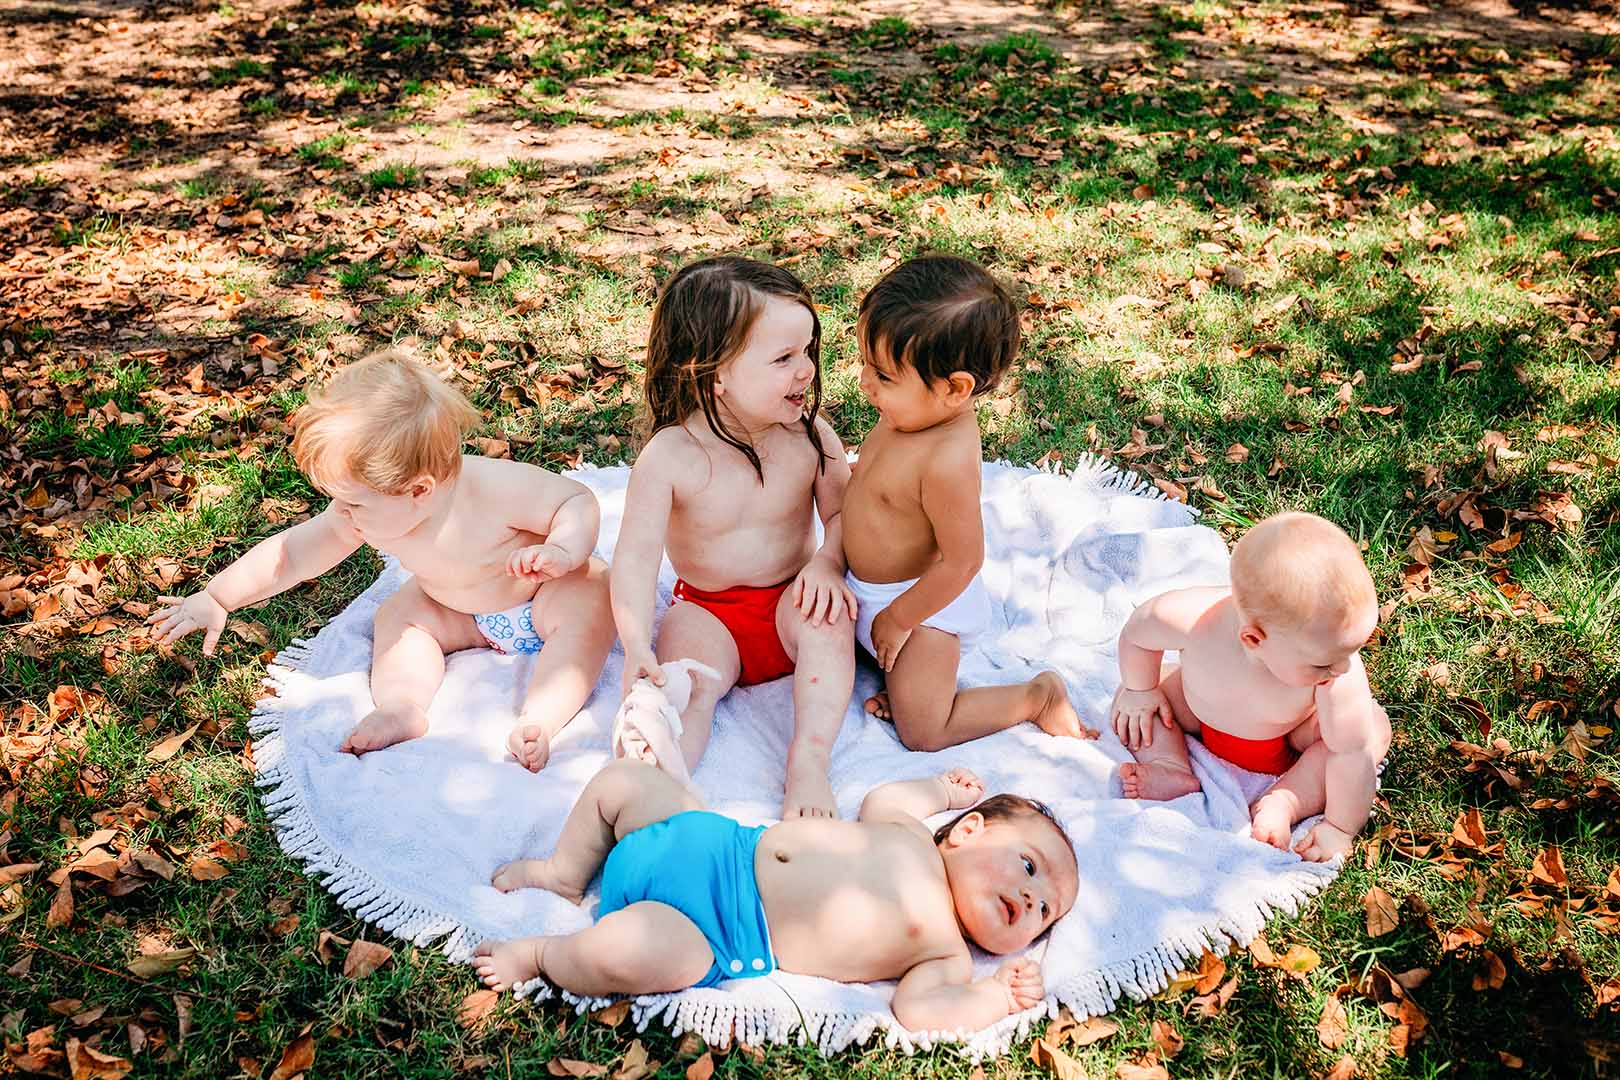 5 babies playing outside in the shade of a tree. Each has a different colour cloth nappy on, and they fit all the babies snugly so no leaks can happen—Blue, red and white reusable cloth nappies